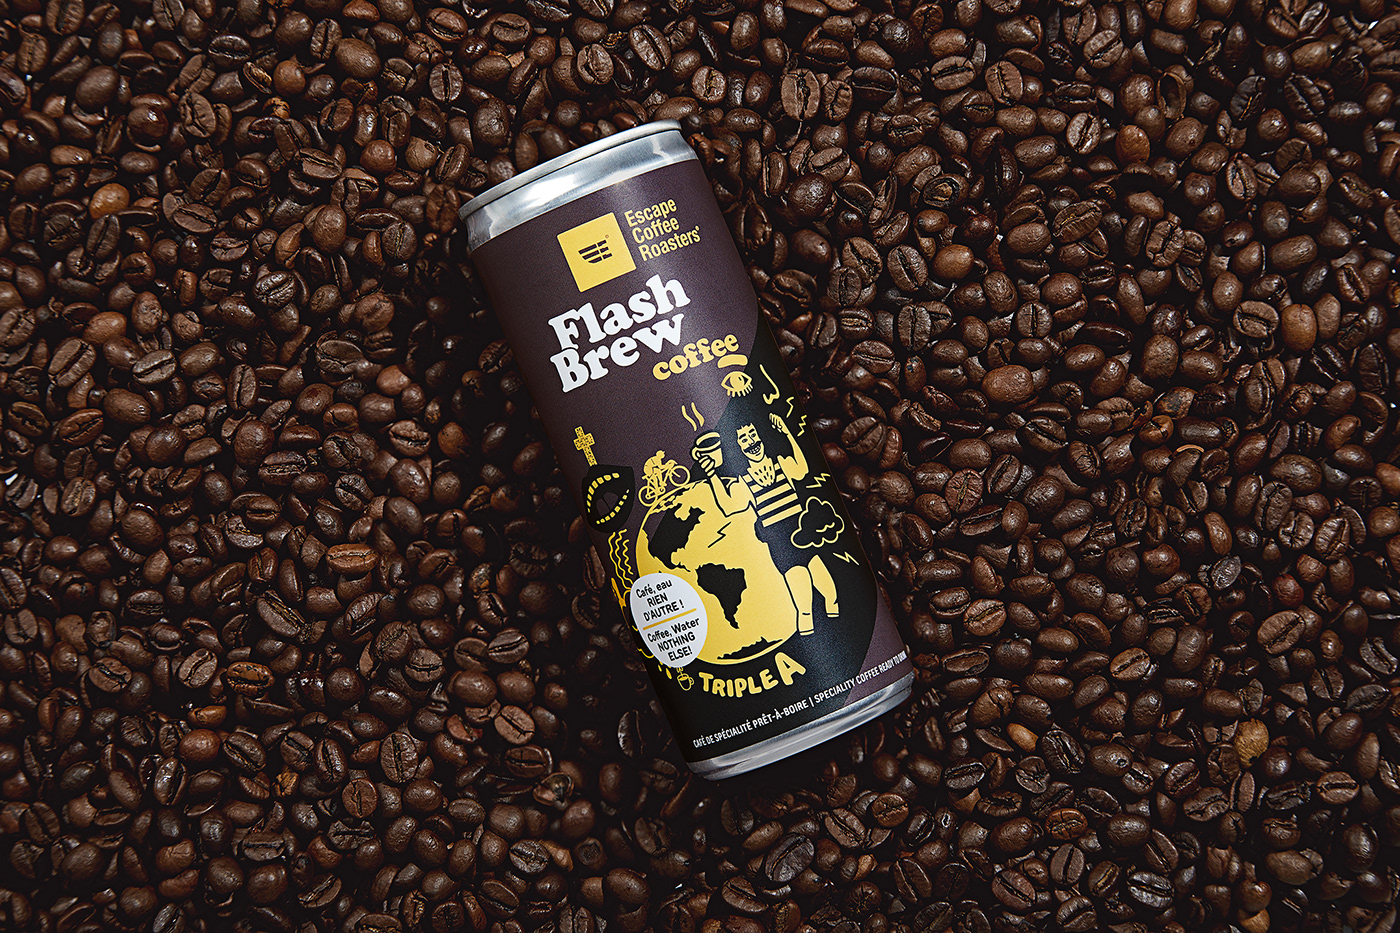 brand strategy cafe can Coffee flash brew innovation Packaging